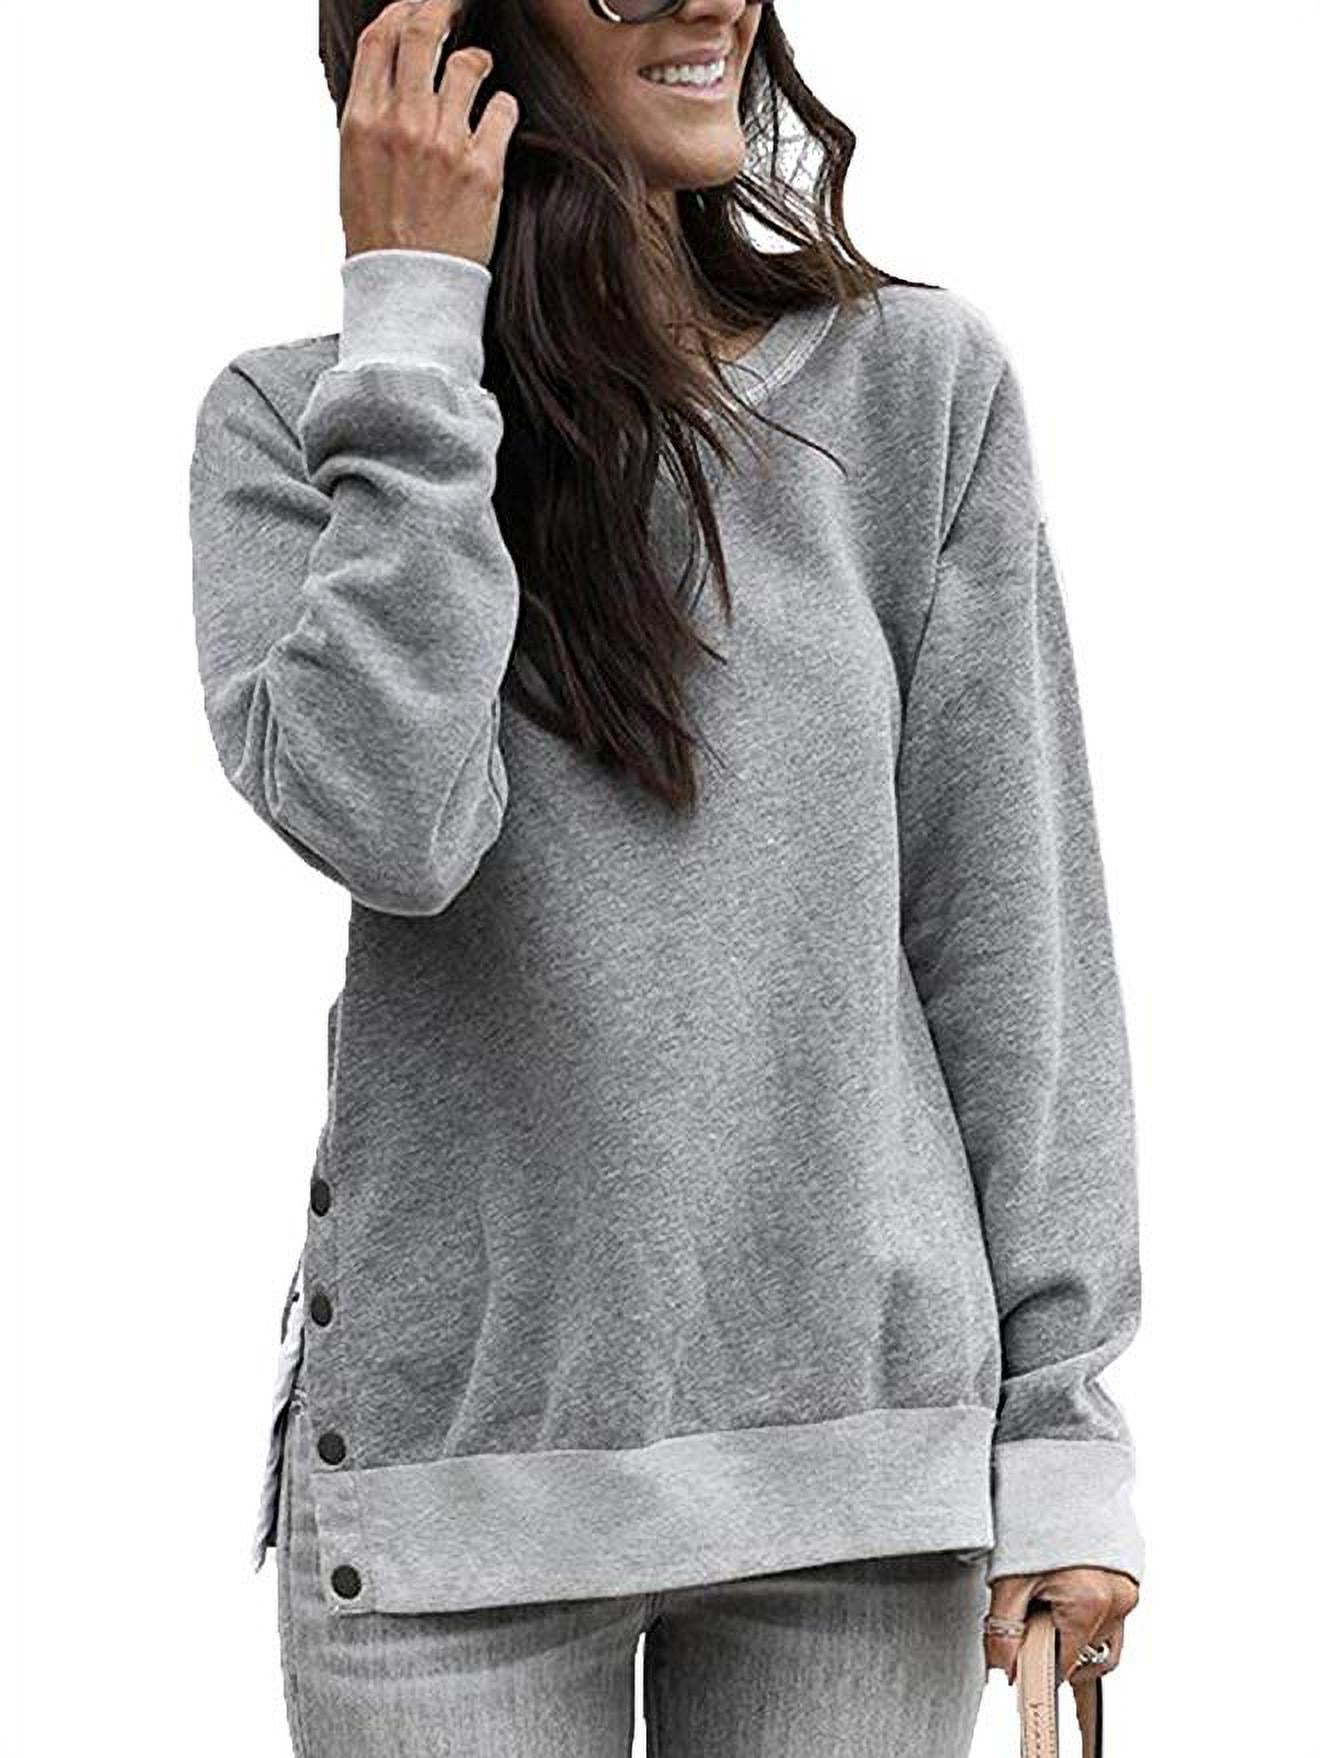 Eoailr Crewneck Sweatshirts for Women Womens Fall Clothes Oversized Tops Pullover Printed Long Sleeve Shirts Casual Blouse